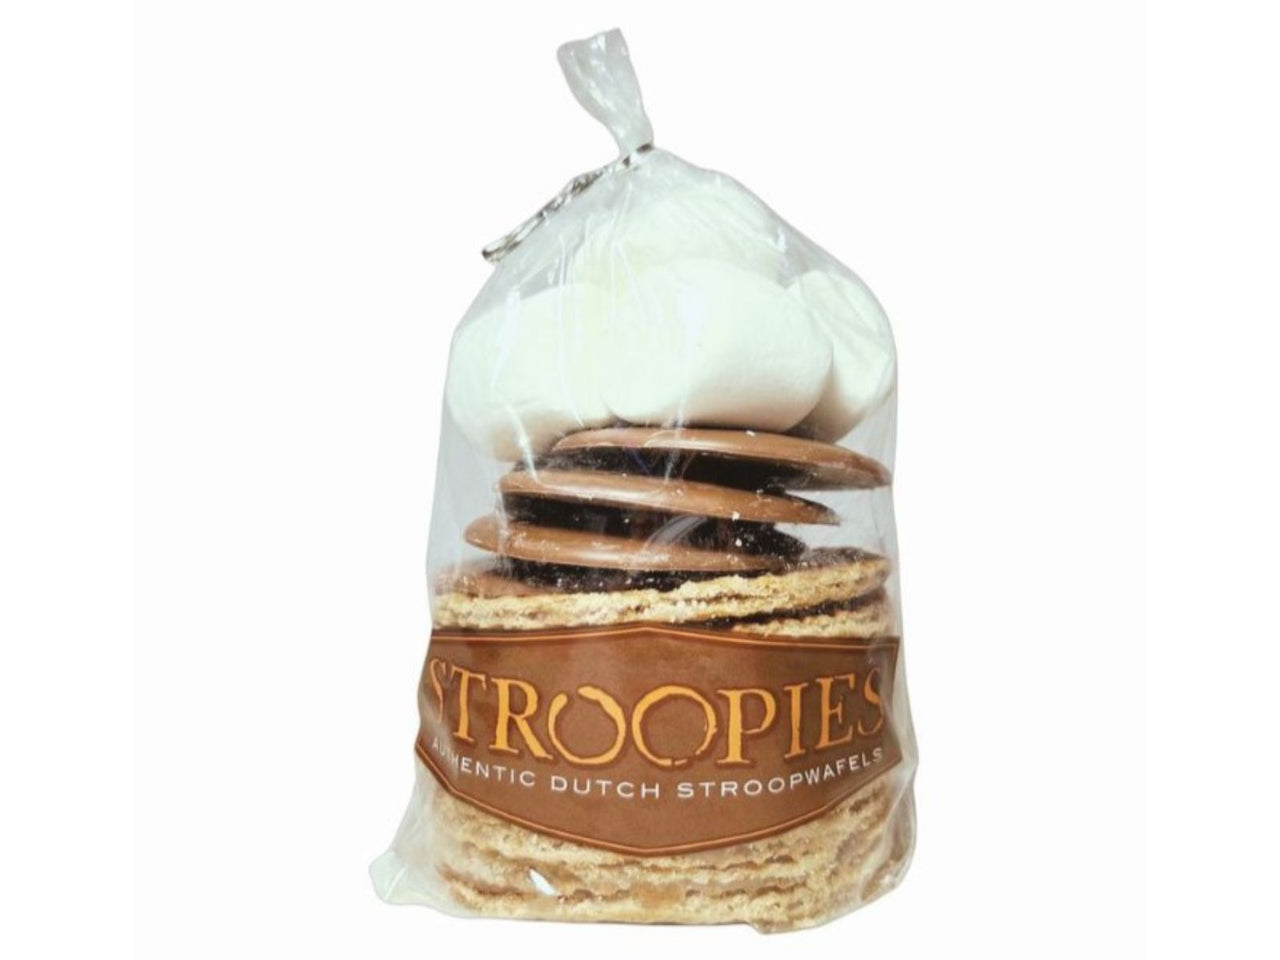 Stroopies - Gluten-Free S'mores Kit - (Family Pack)